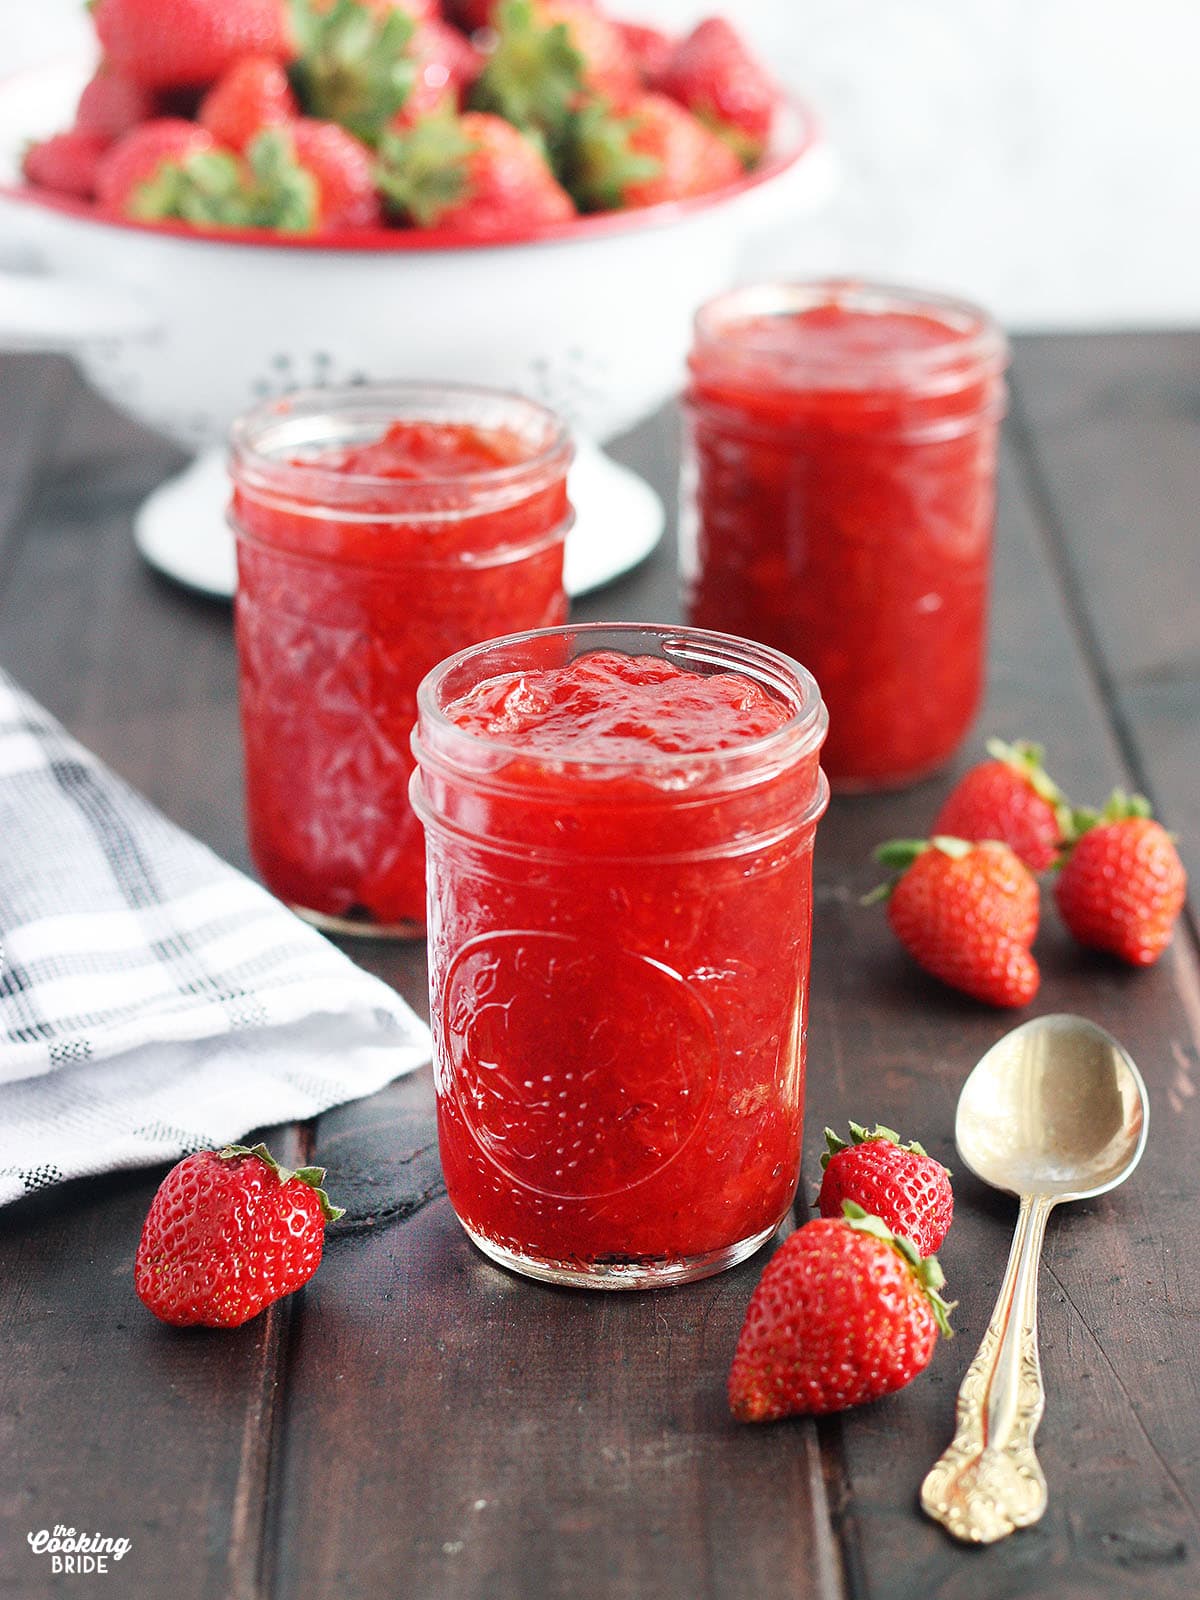 three jars of homemade strawberry preserves on a wooden table with fresh strawberries and a spoon to the side, colander of fresh strawberries in the background